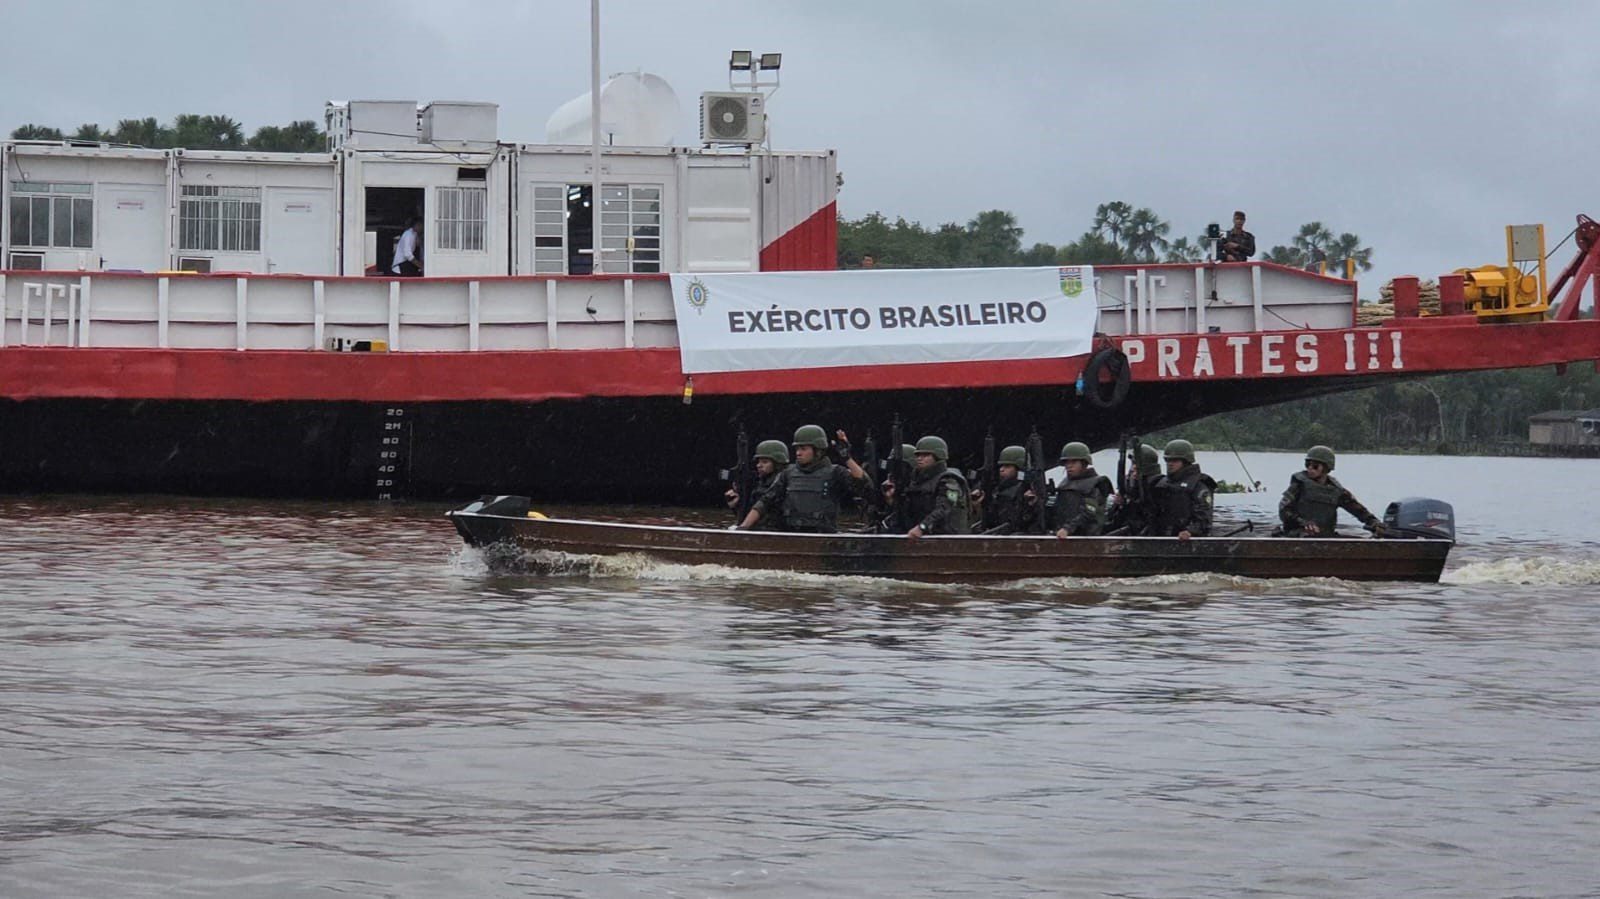 Brazilian army contributes to the expansion of fiber optics in the Amazon